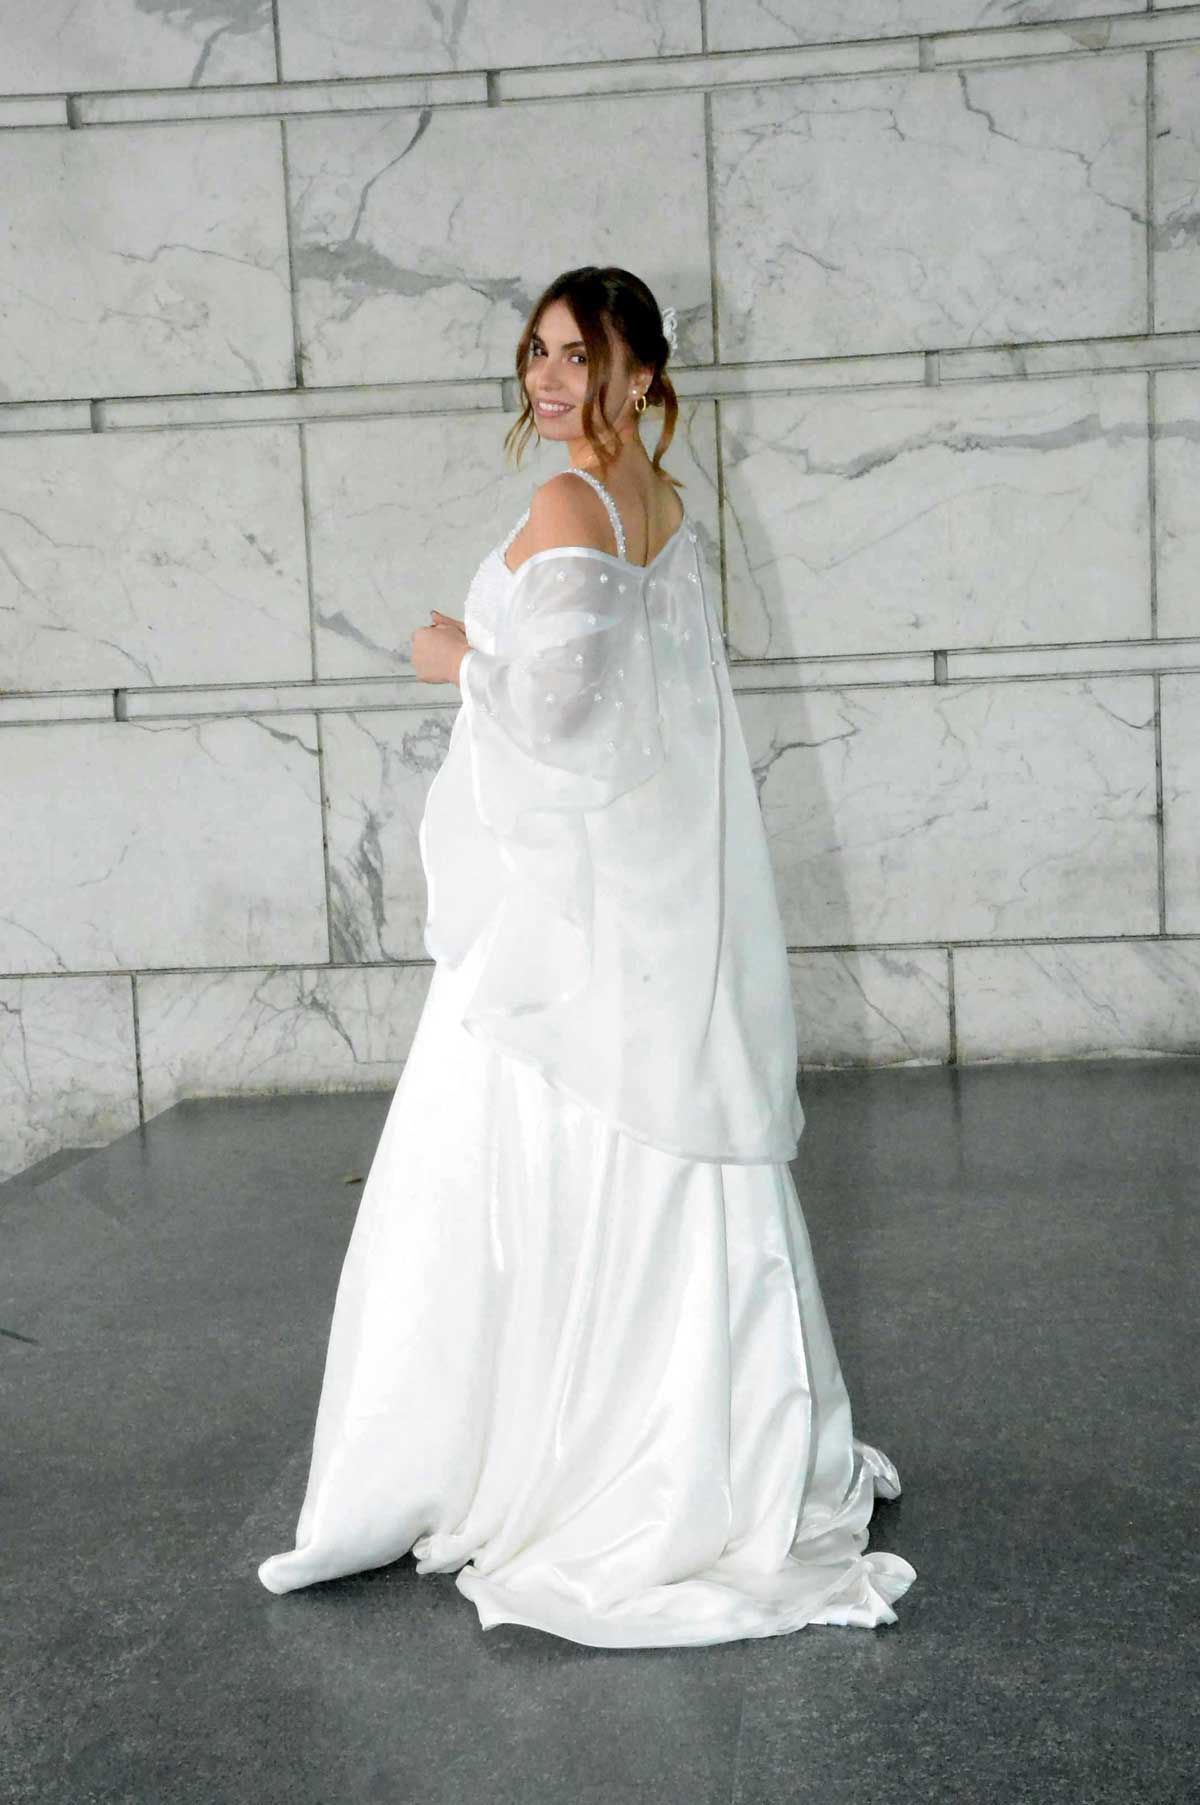 Marriage ideas. Elins dresses in Italy at Roma Sposa - Tailored suits wedding dress ceremony. Fashion clothing for men and women Elins is online